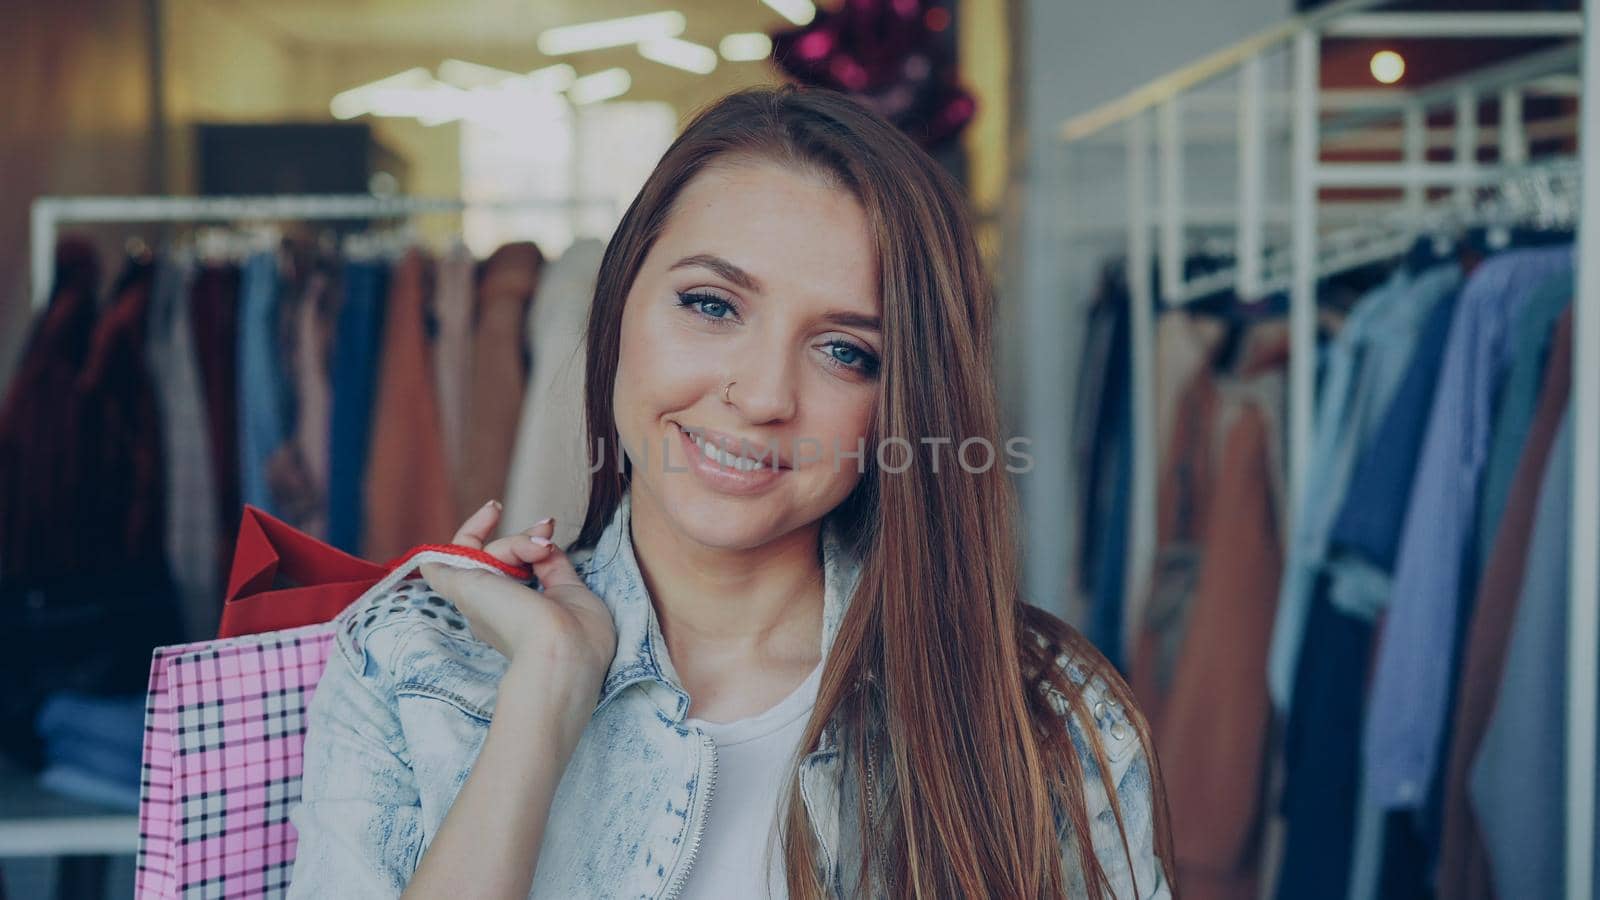 Close-up portrait of attractive young girl standing with paper bags in luxurious clothing shop, smiling gladly and looking at camera. Stylish women's clothes is in background. Youth lifestyle concept.